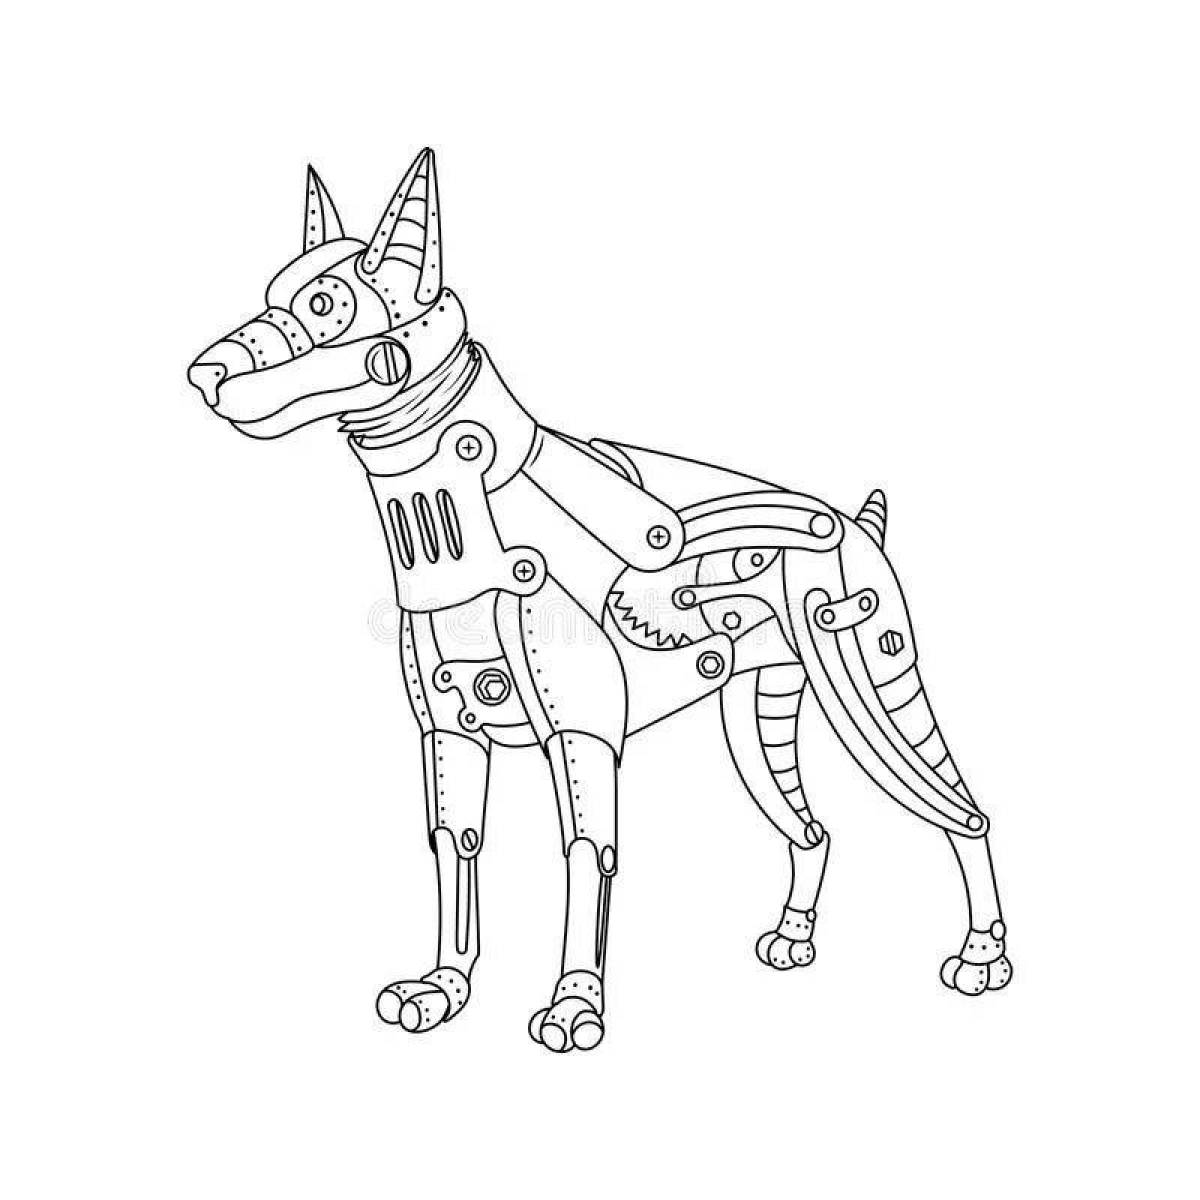 Fabulous robot dog coloring page